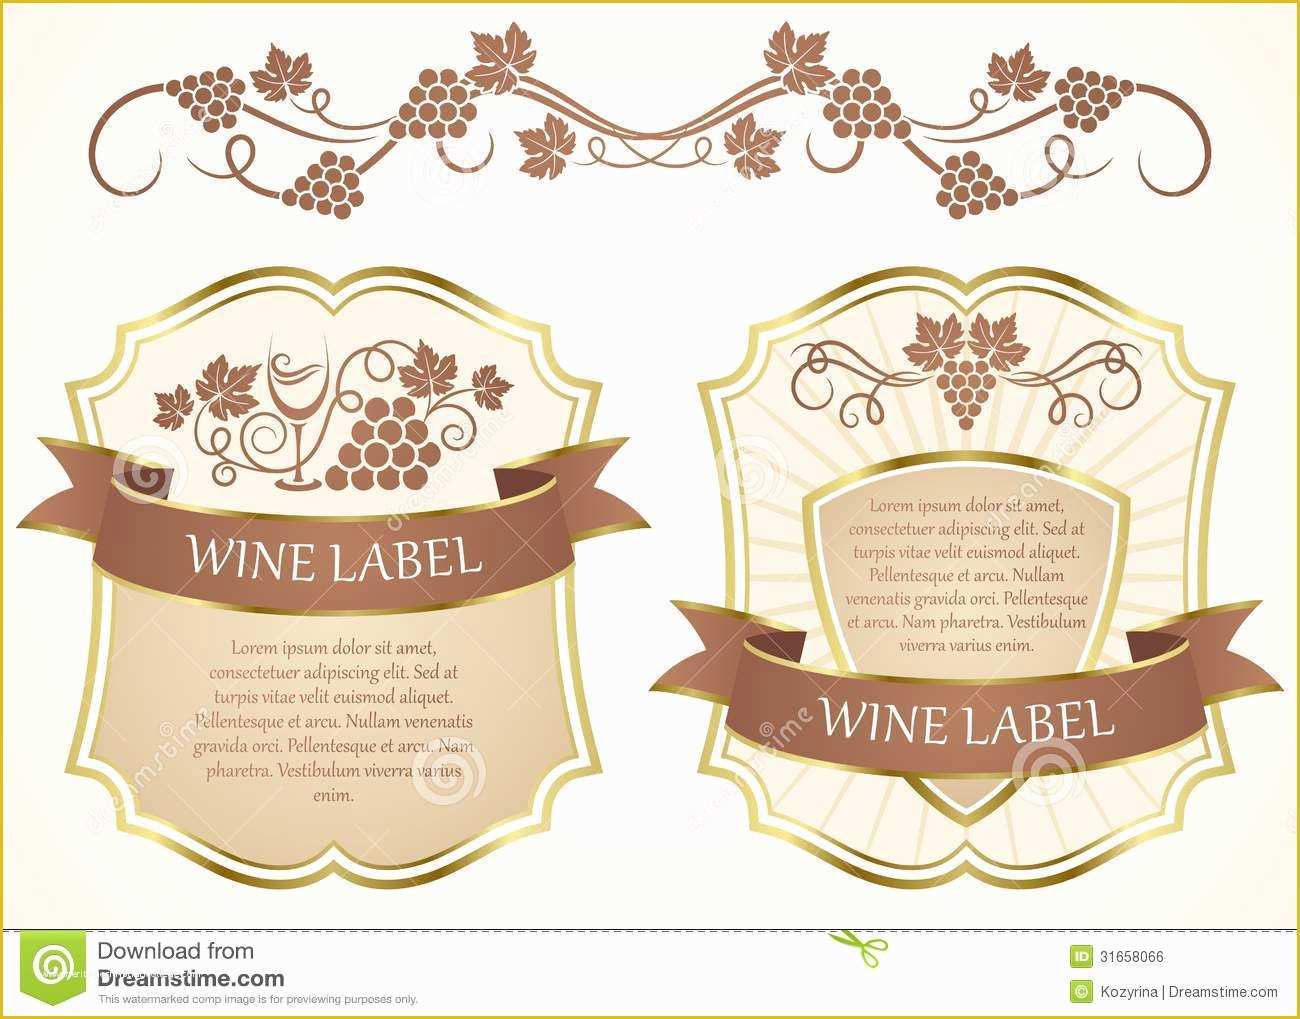 Free Wine Website Templates Download Of Wine Label Royalty Free Stock Image Image